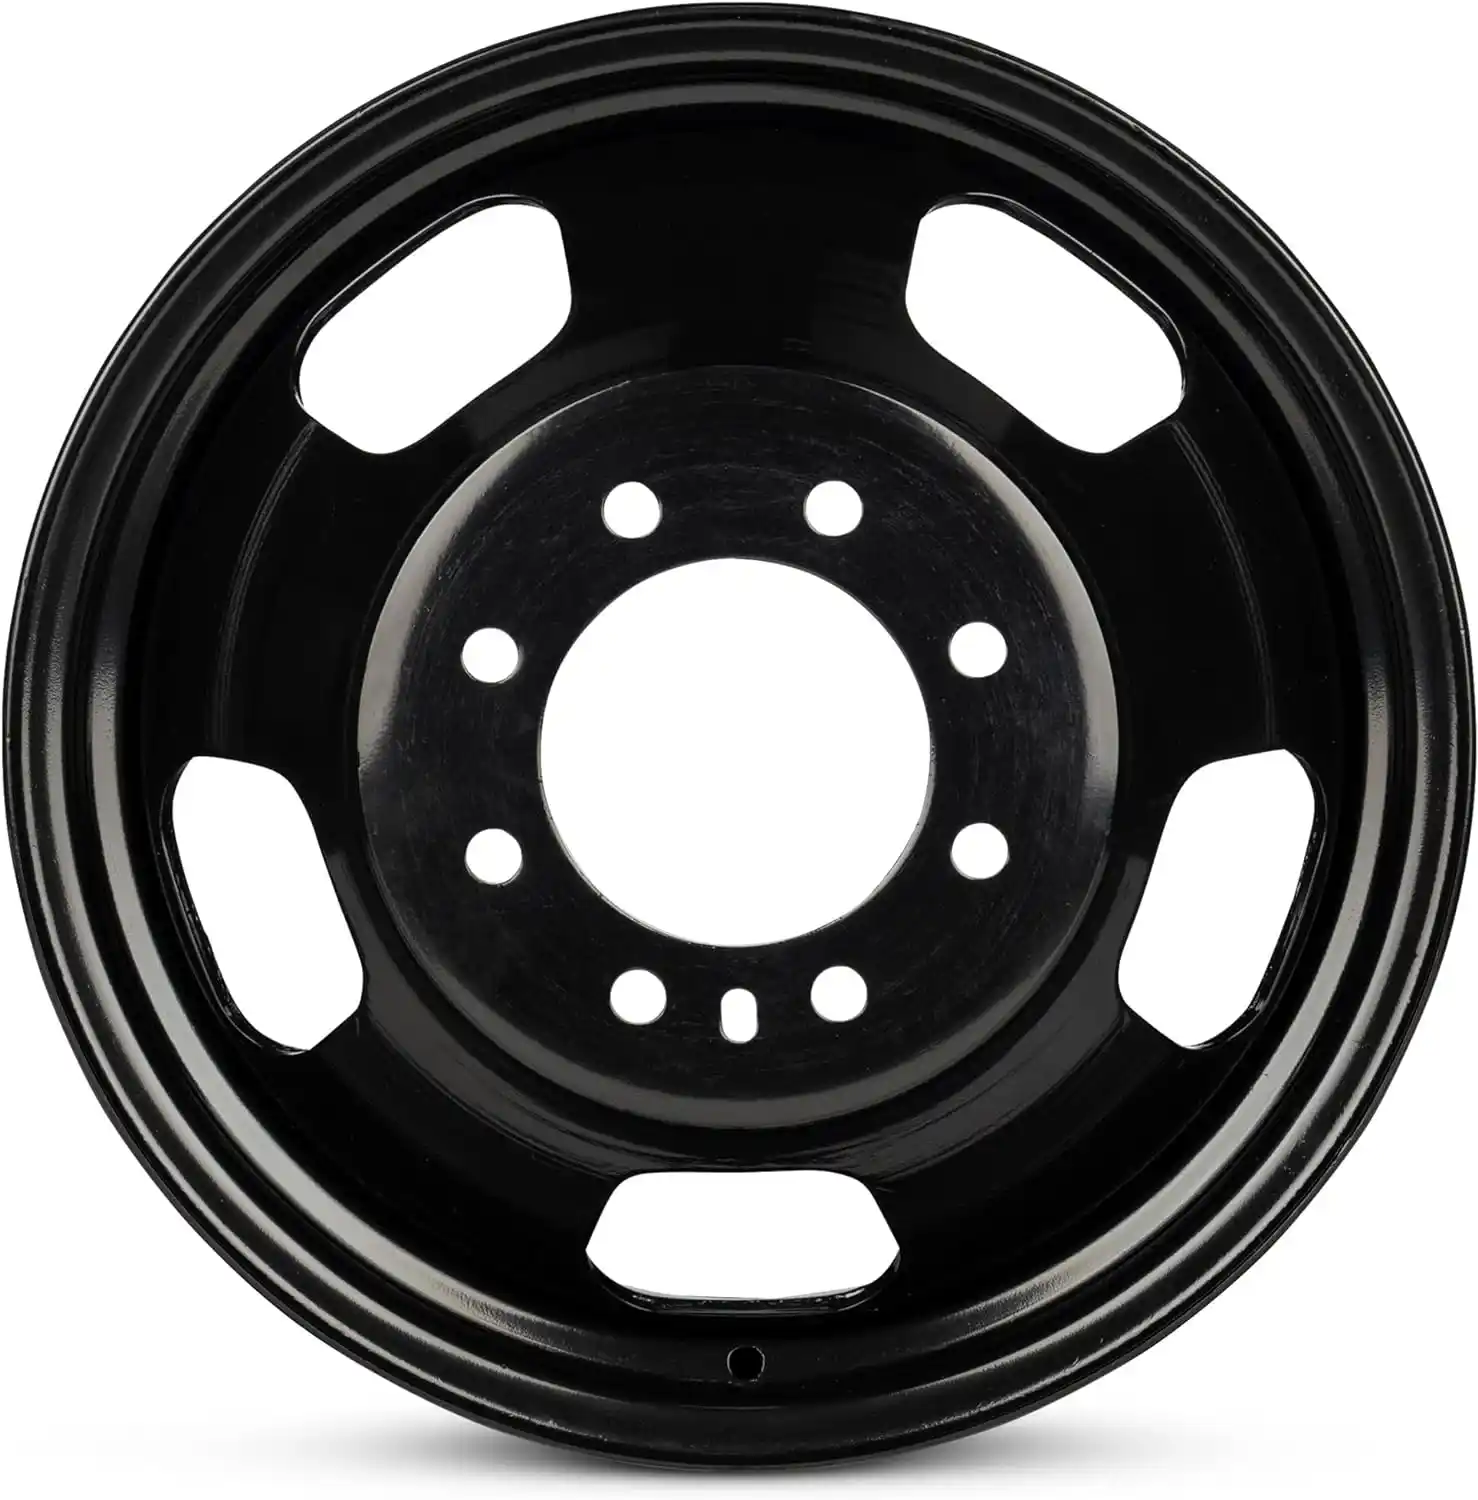 For 2003-2018 Dodge Ram 3500 17 Inch Painted Black Rim - OE Direct Replacement - Road Ready Car Wheel